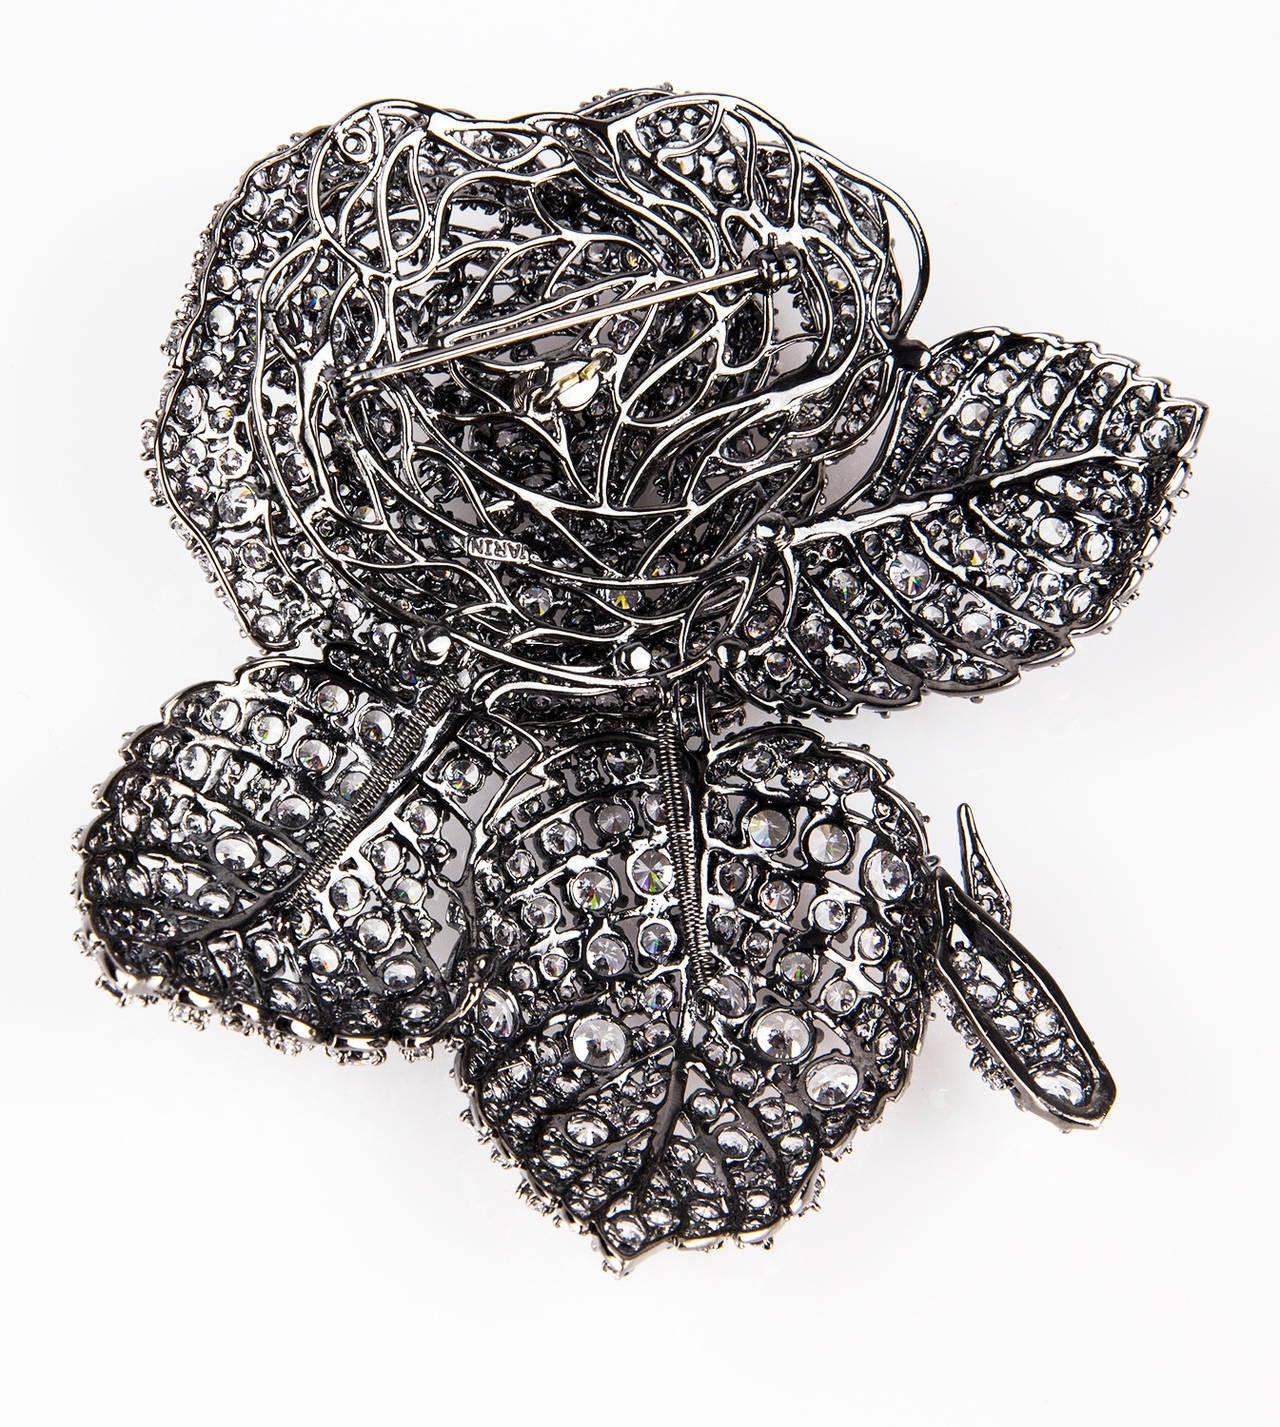 Sensational Vanderbilt style Rose en Tremblant Statement Brooch, encrusted with CZ cubic zirconium, hand set with Fabulous attention to detailing; Black Rhodium. Approx. size: 4” x 4” at widest point. The perfect accessory for the modern woman! Chic